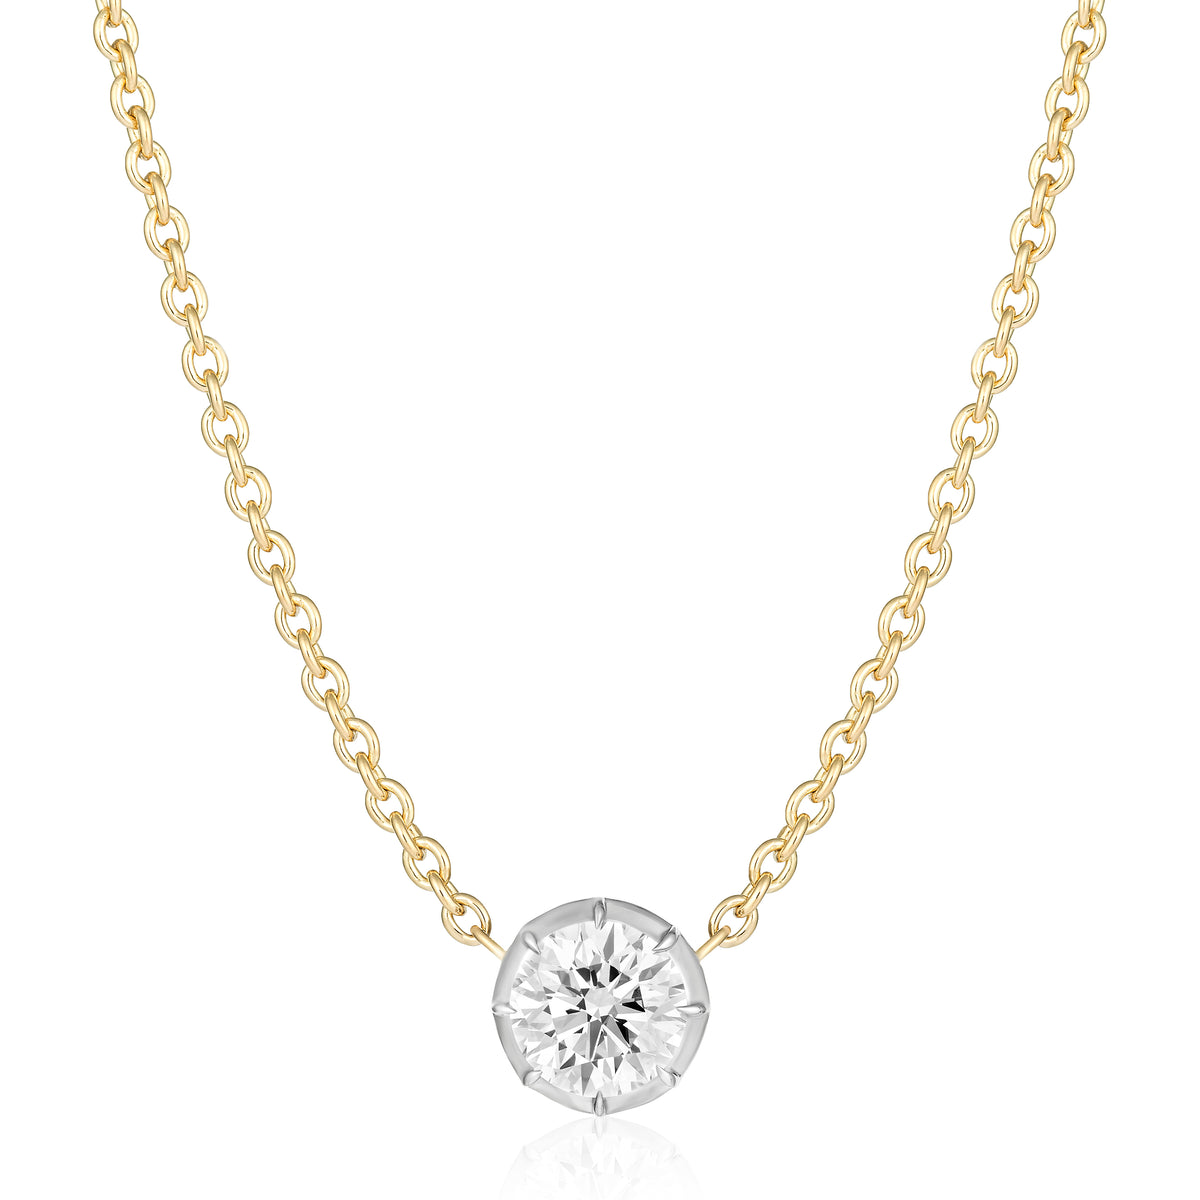 Collet Set Round Diamond Pendant in White and Yellow Gold